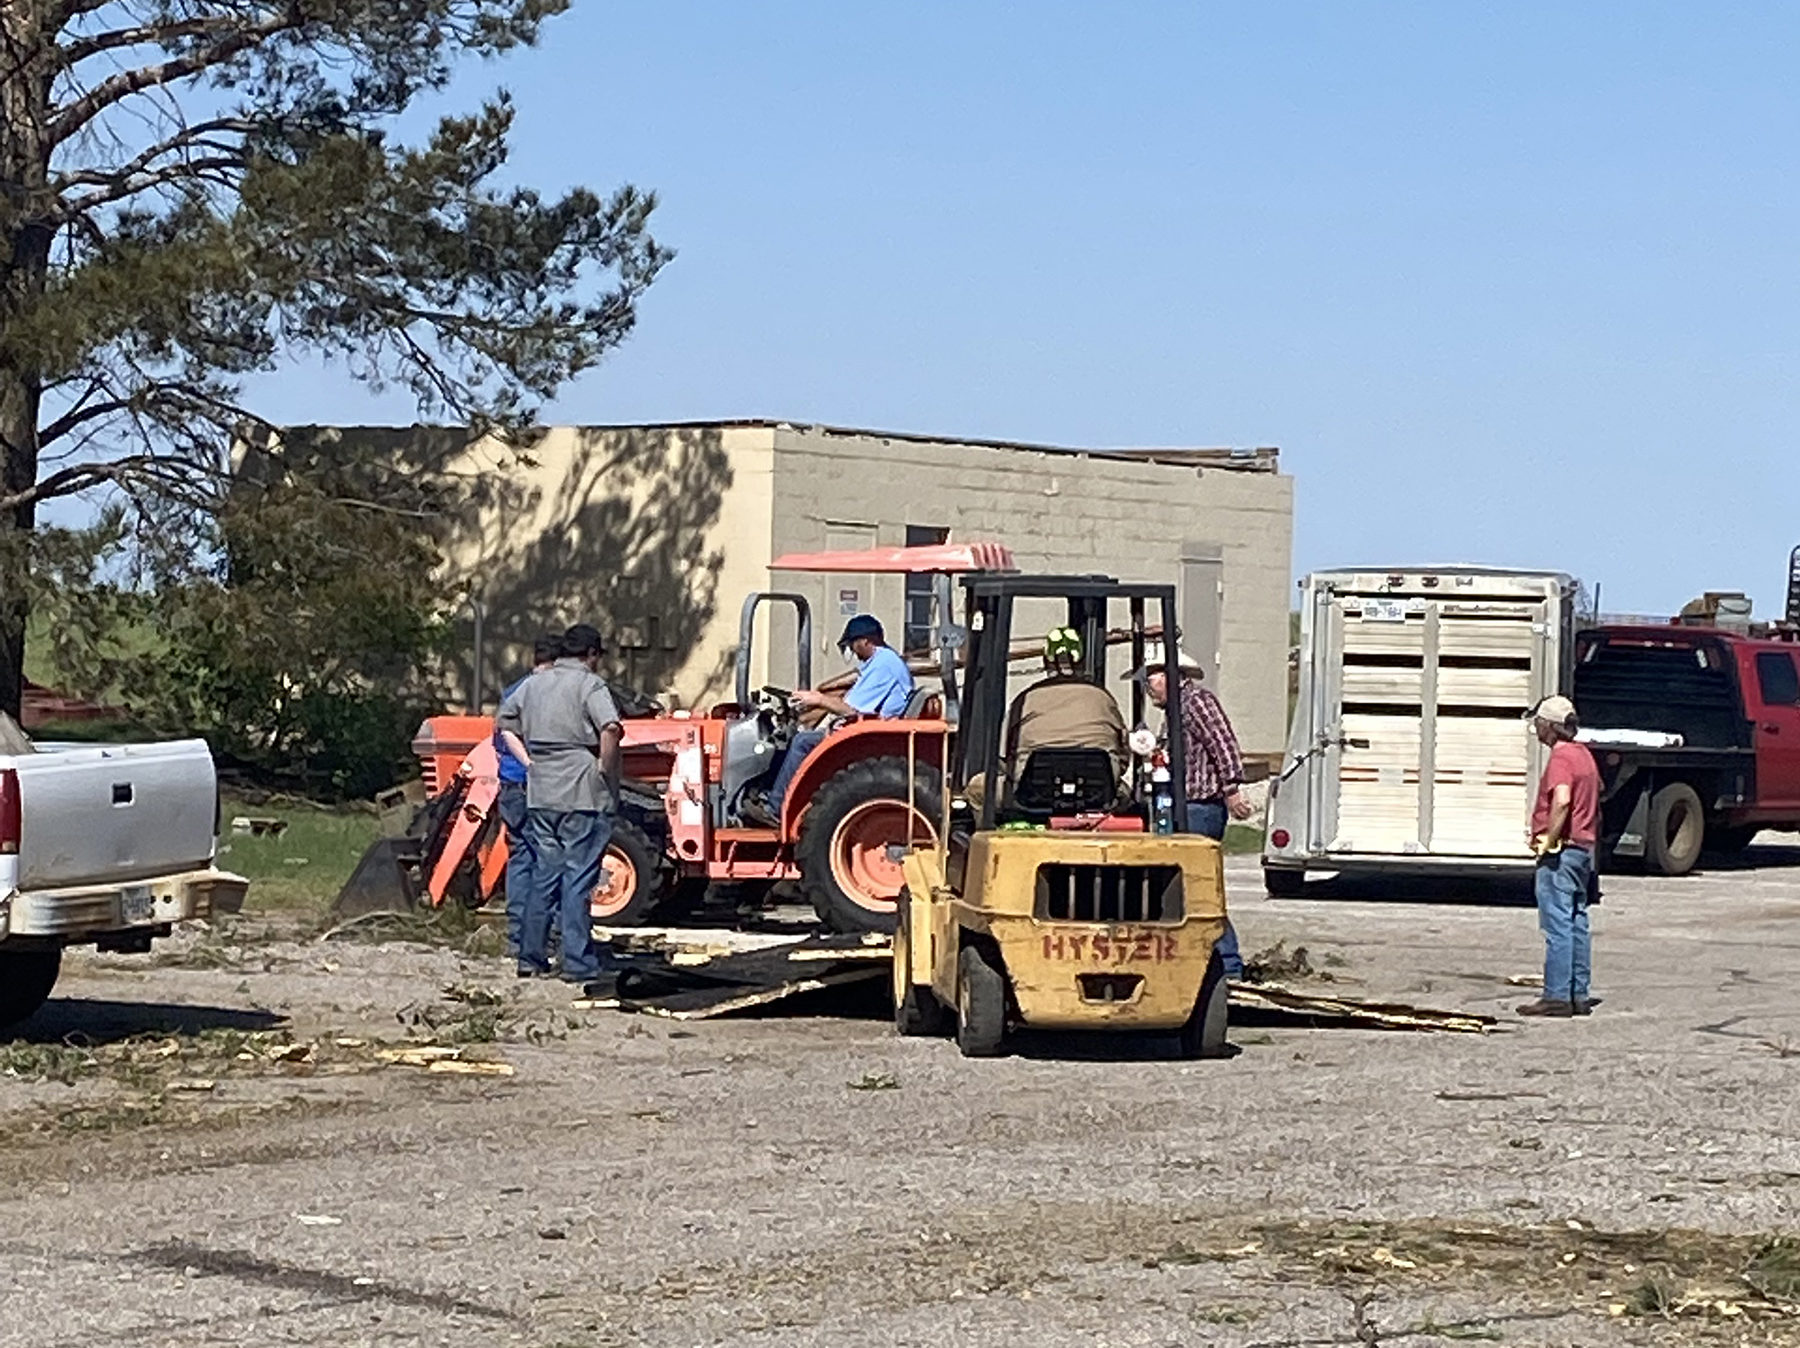 Five men are standing and sitting around a tractor and skid loader as debris is being picked up and loaded into a trailer.